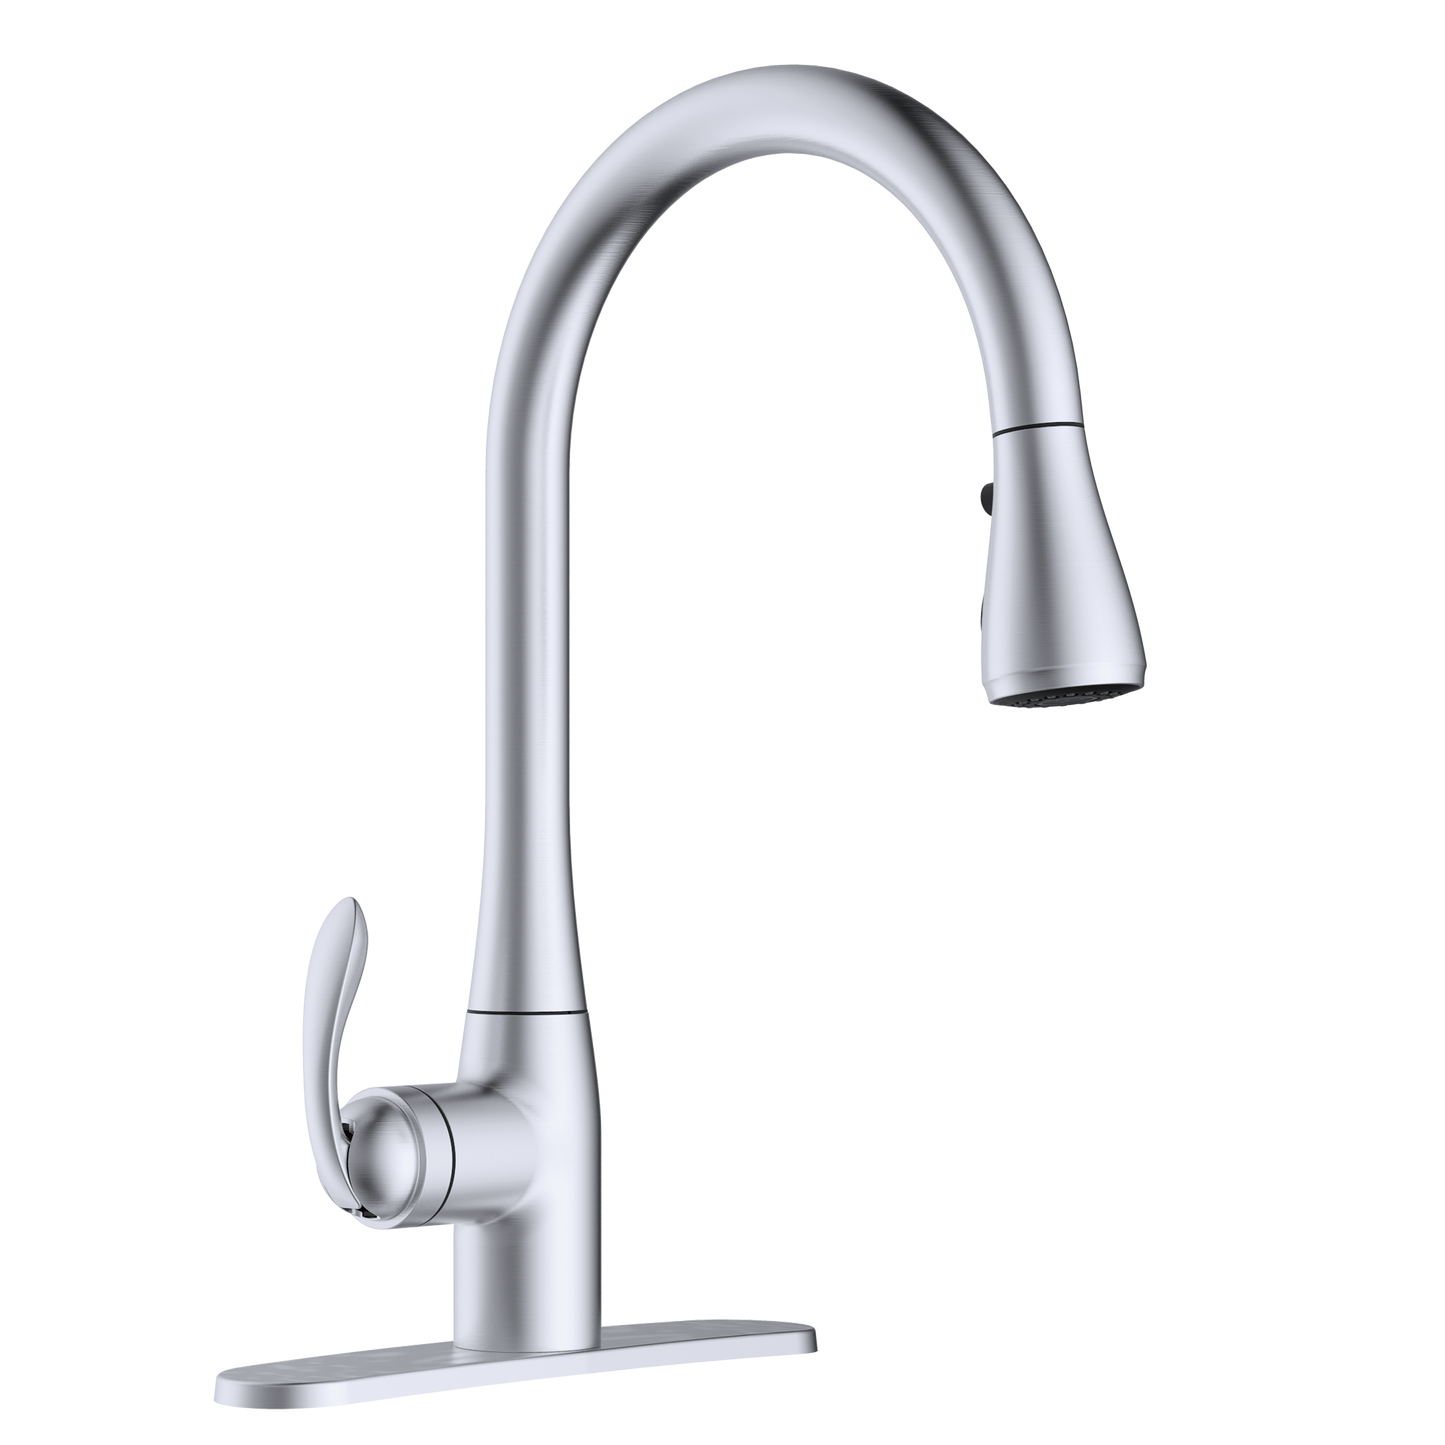 Pulldown Kitchen Faucet With Boost Spray - Stainless Steel